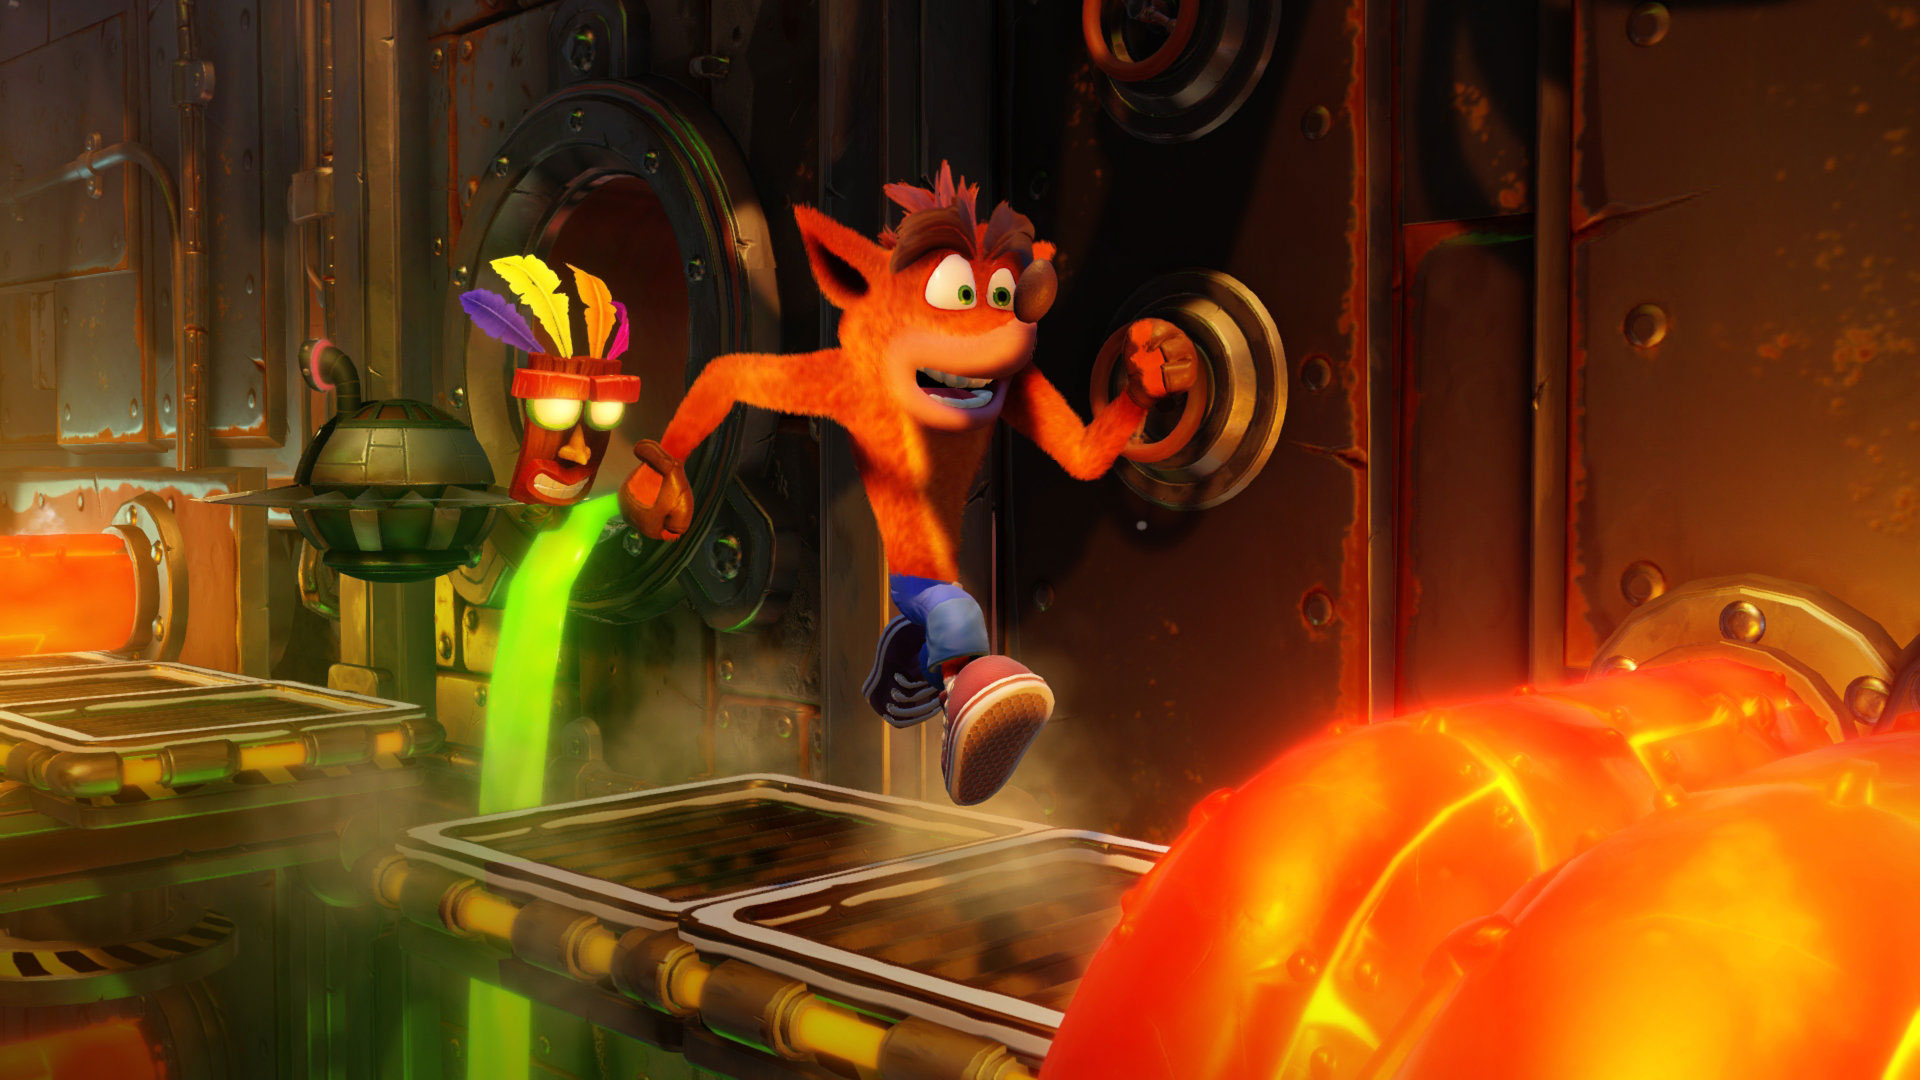 Crash Bandicoot could spin onto mobile